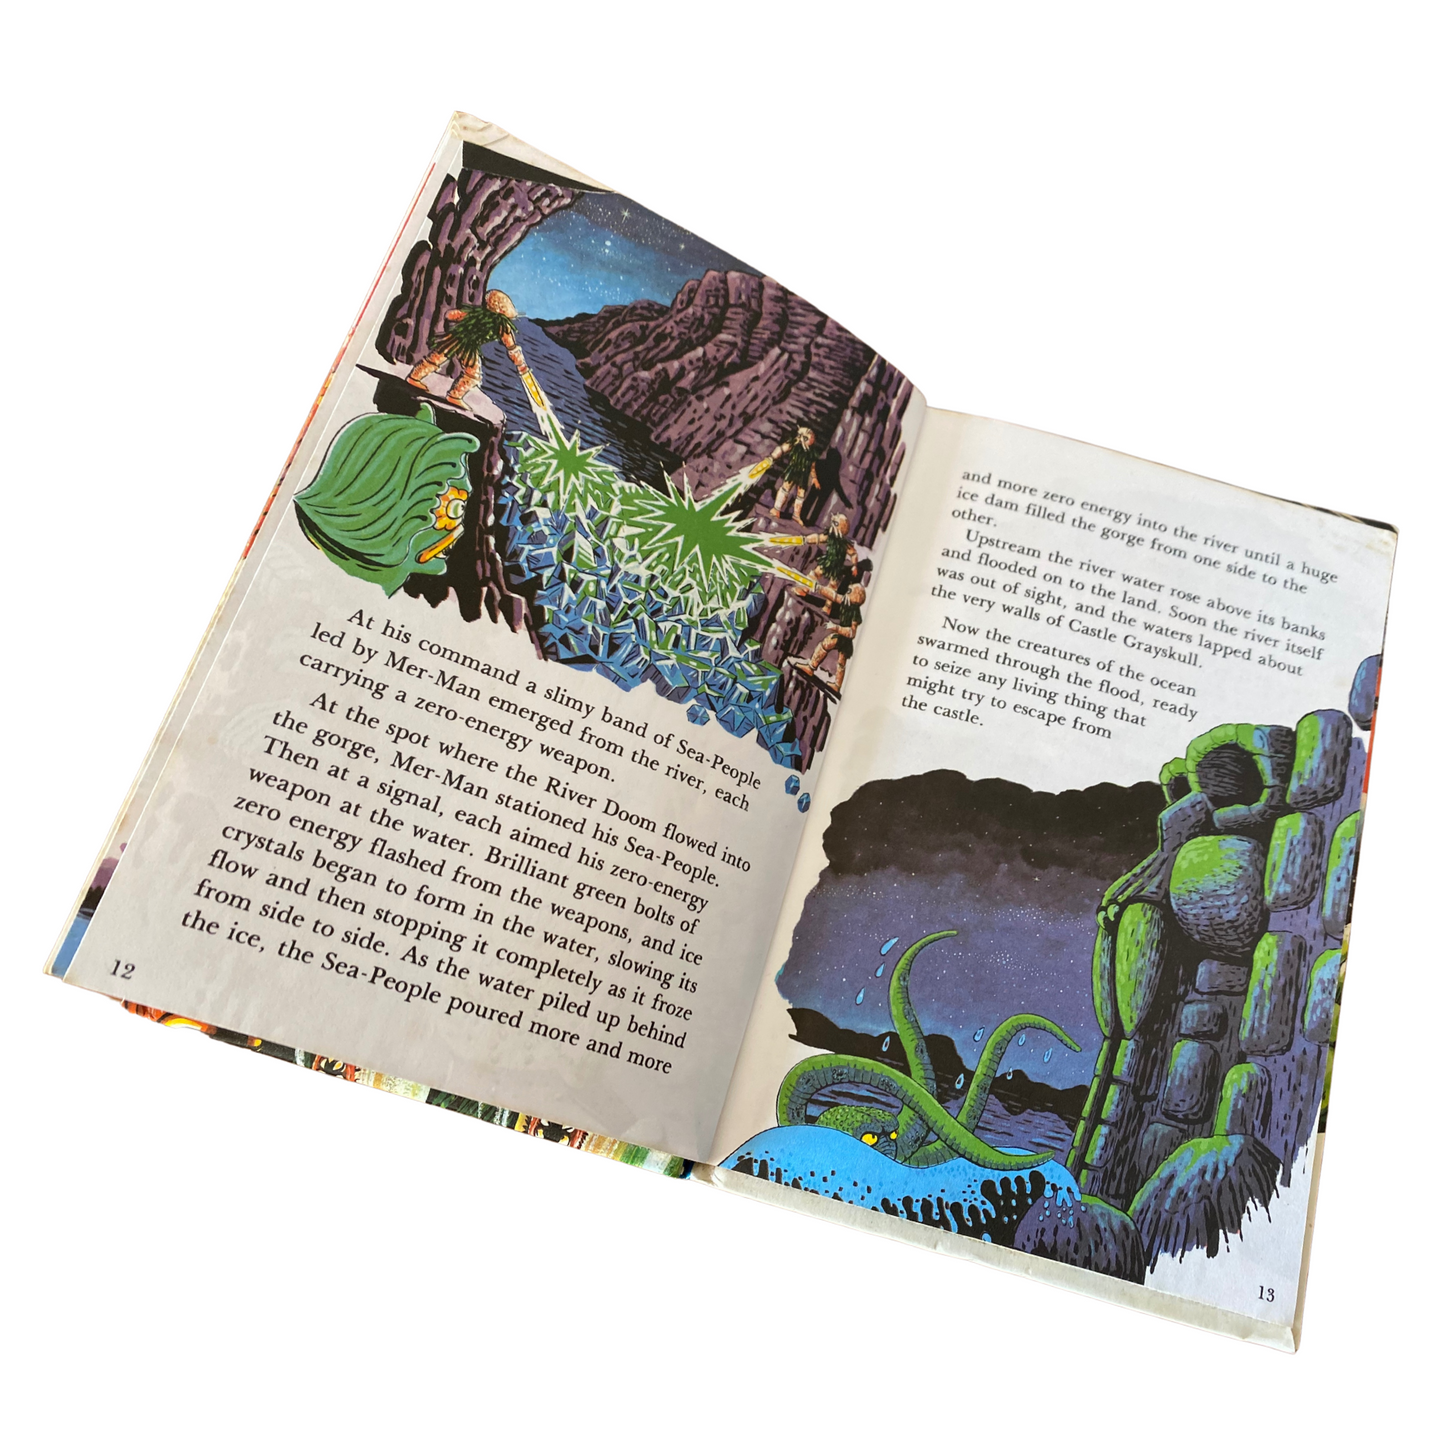 Illustrated by Robin Davies - He-Man Masters of the Universe book